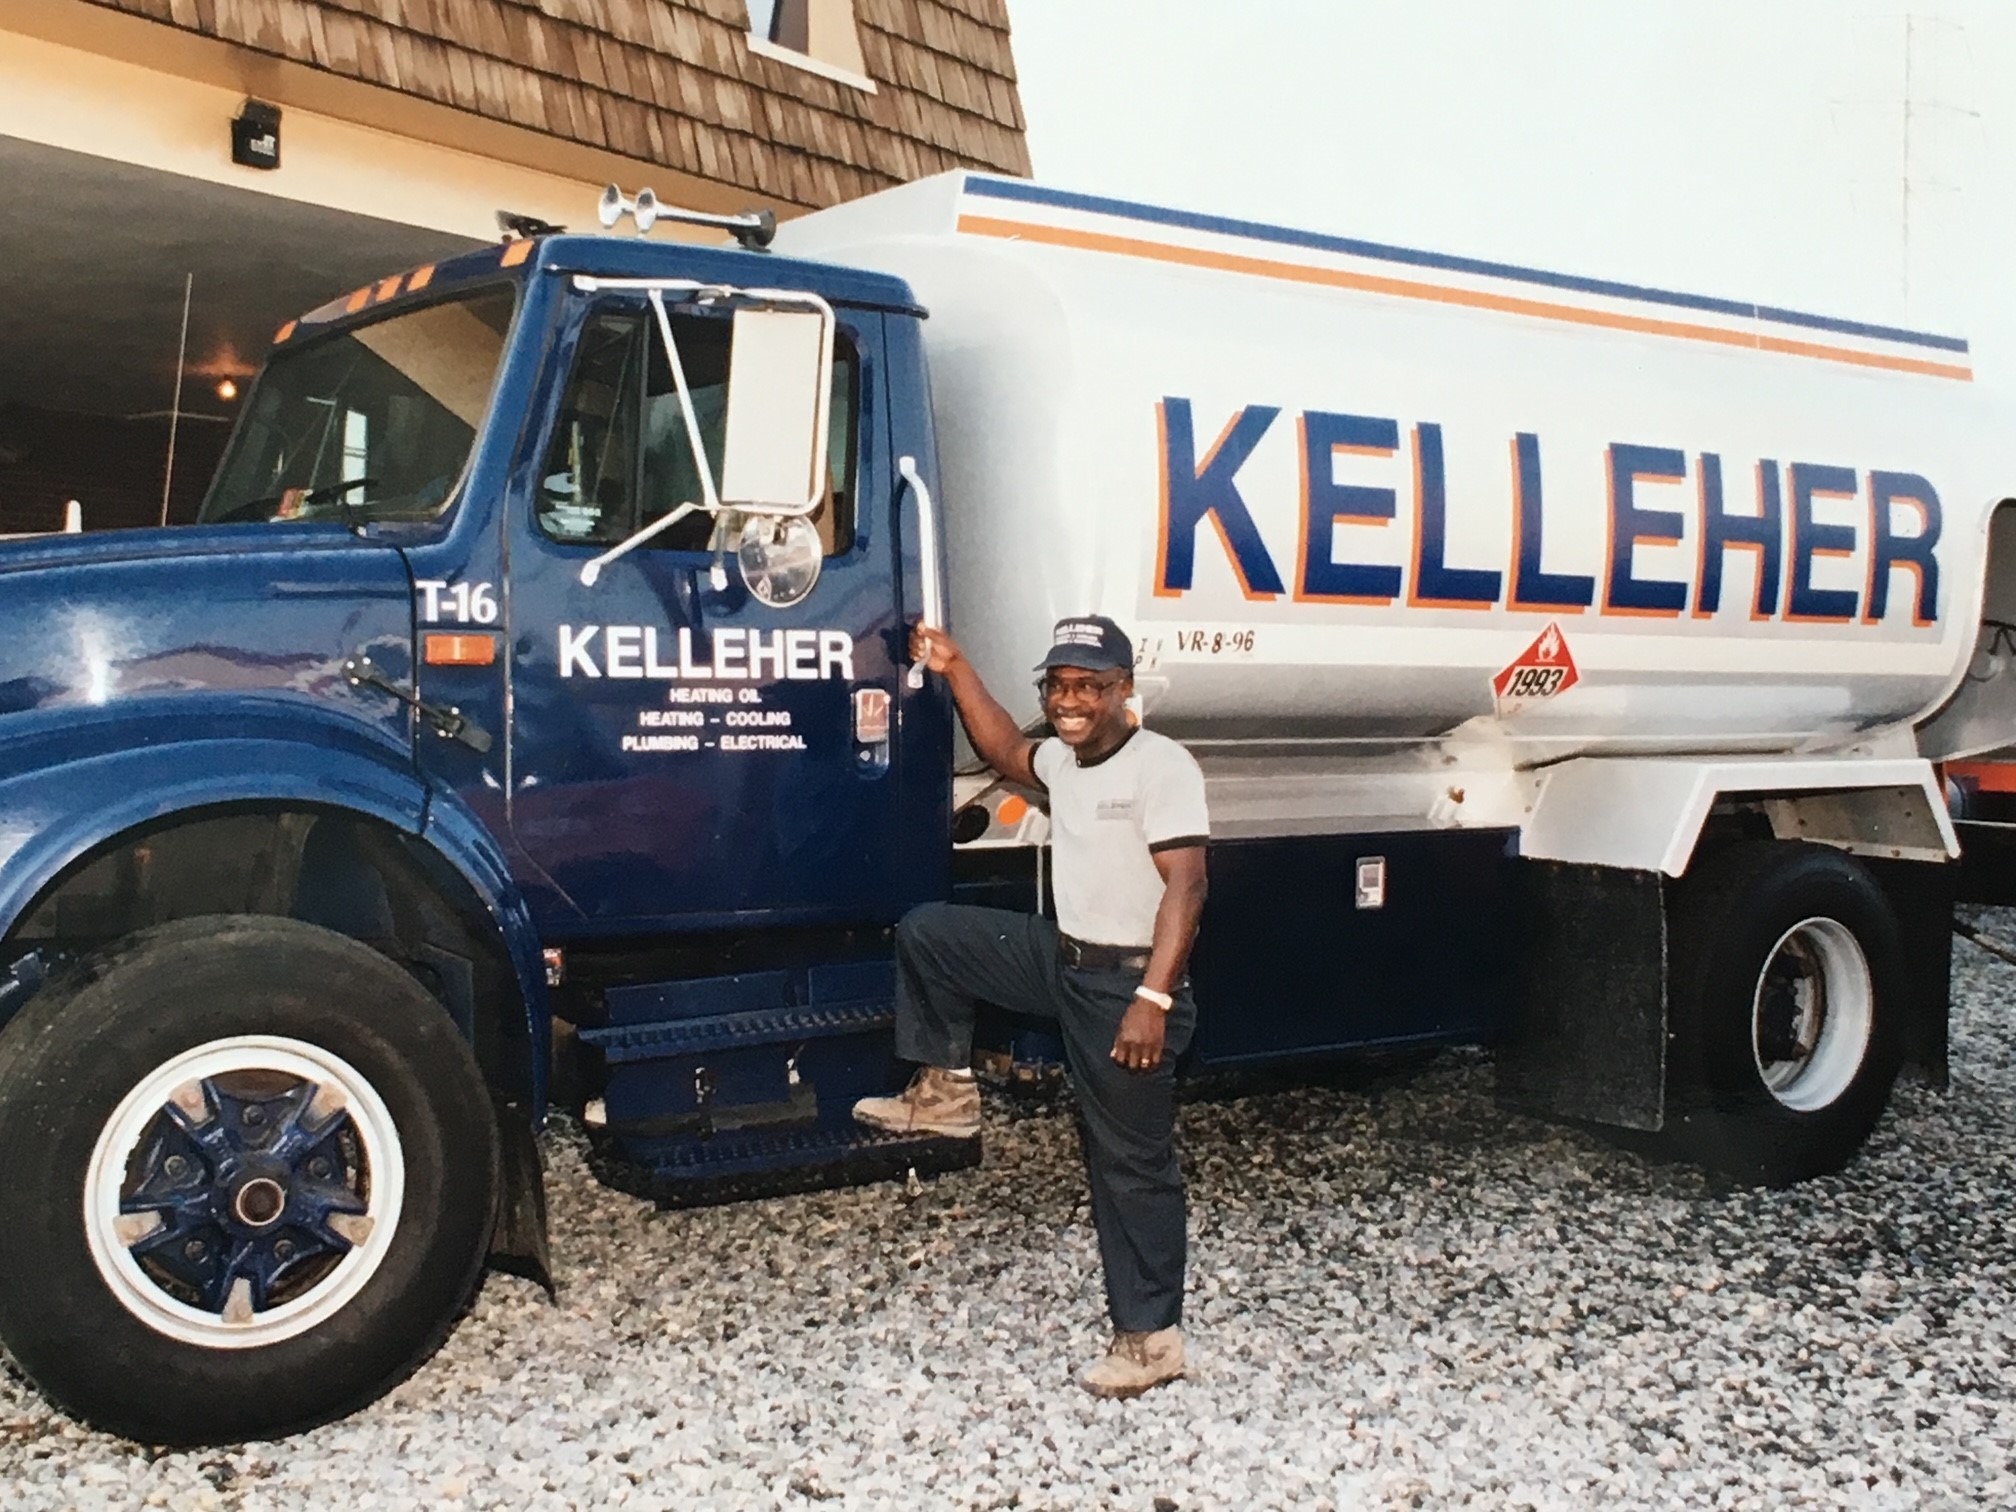 George Noel, fondly known as "Little George" with the oil truck he uses to deliver oil to Kelleher customers 